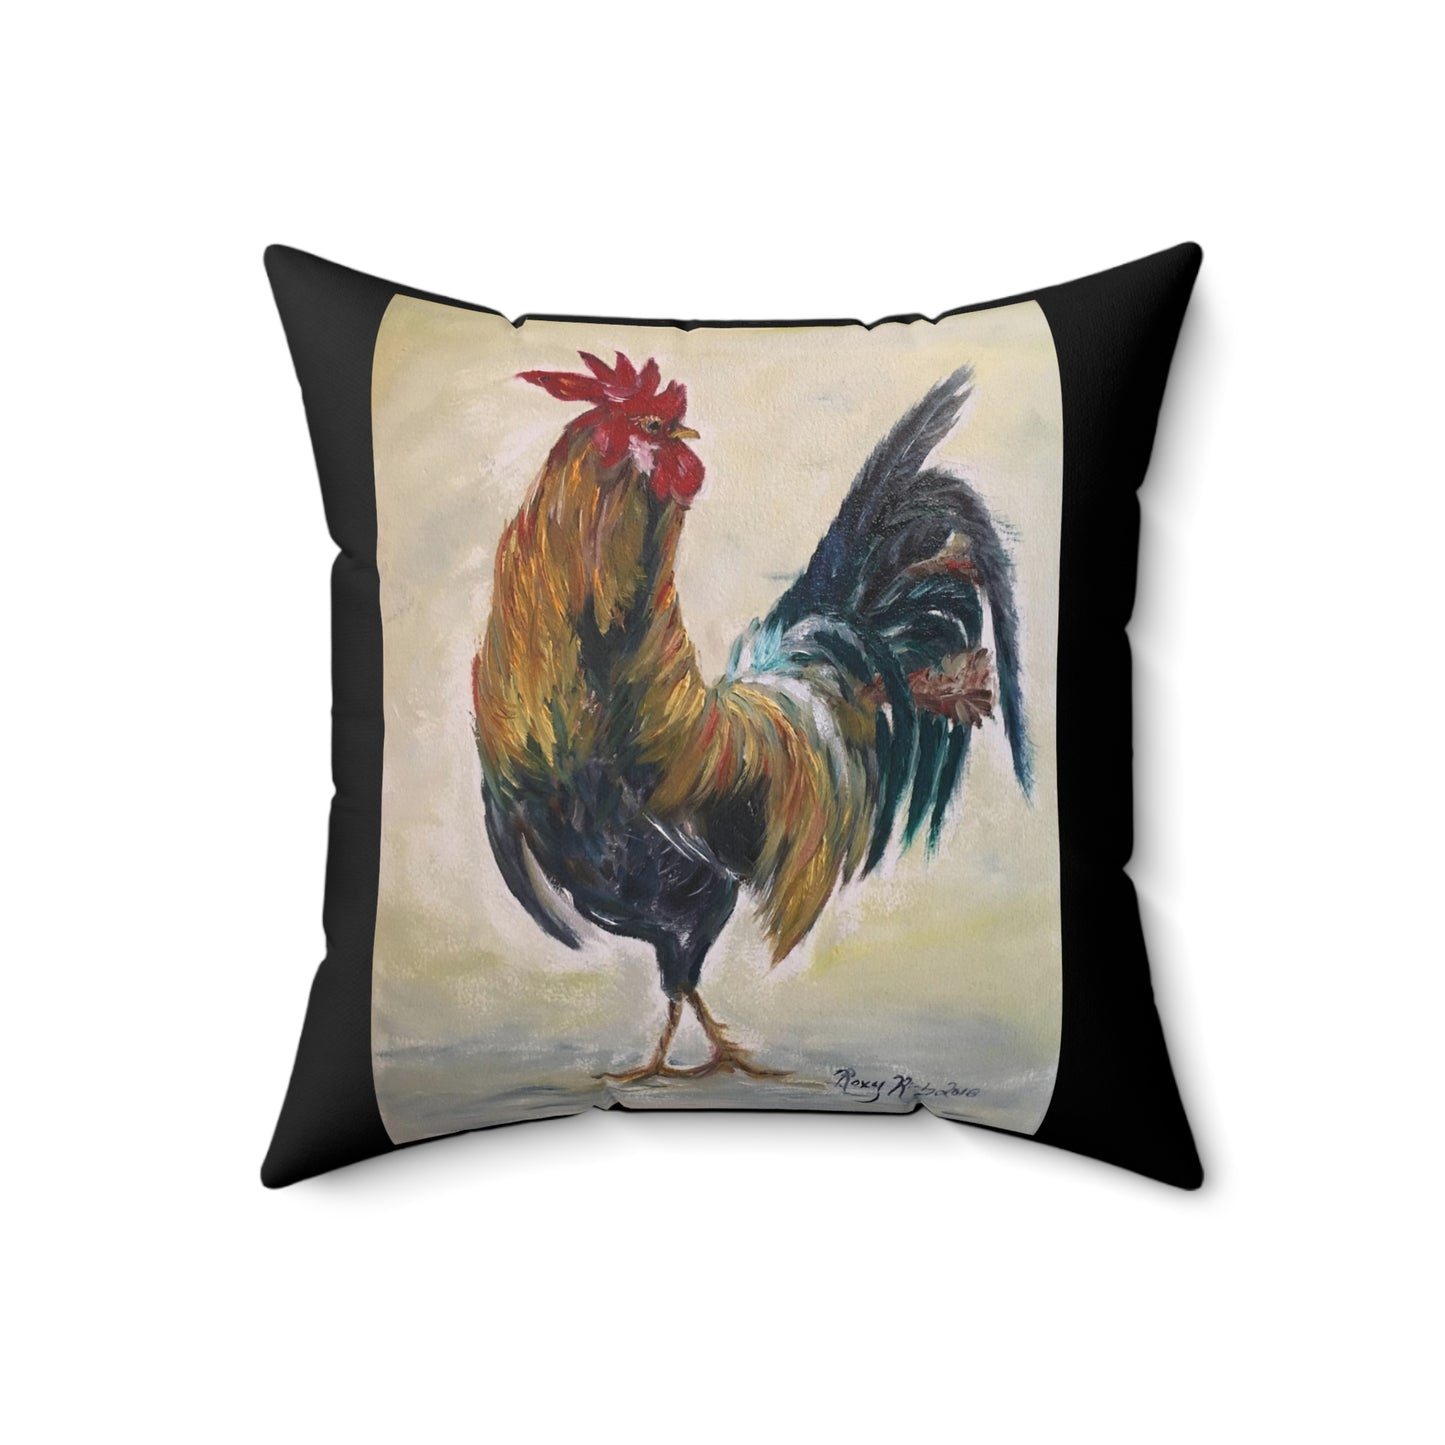 Rooster (Who you Calling Chicken?) Black Background Indoor Spun Polyester Square Pillow